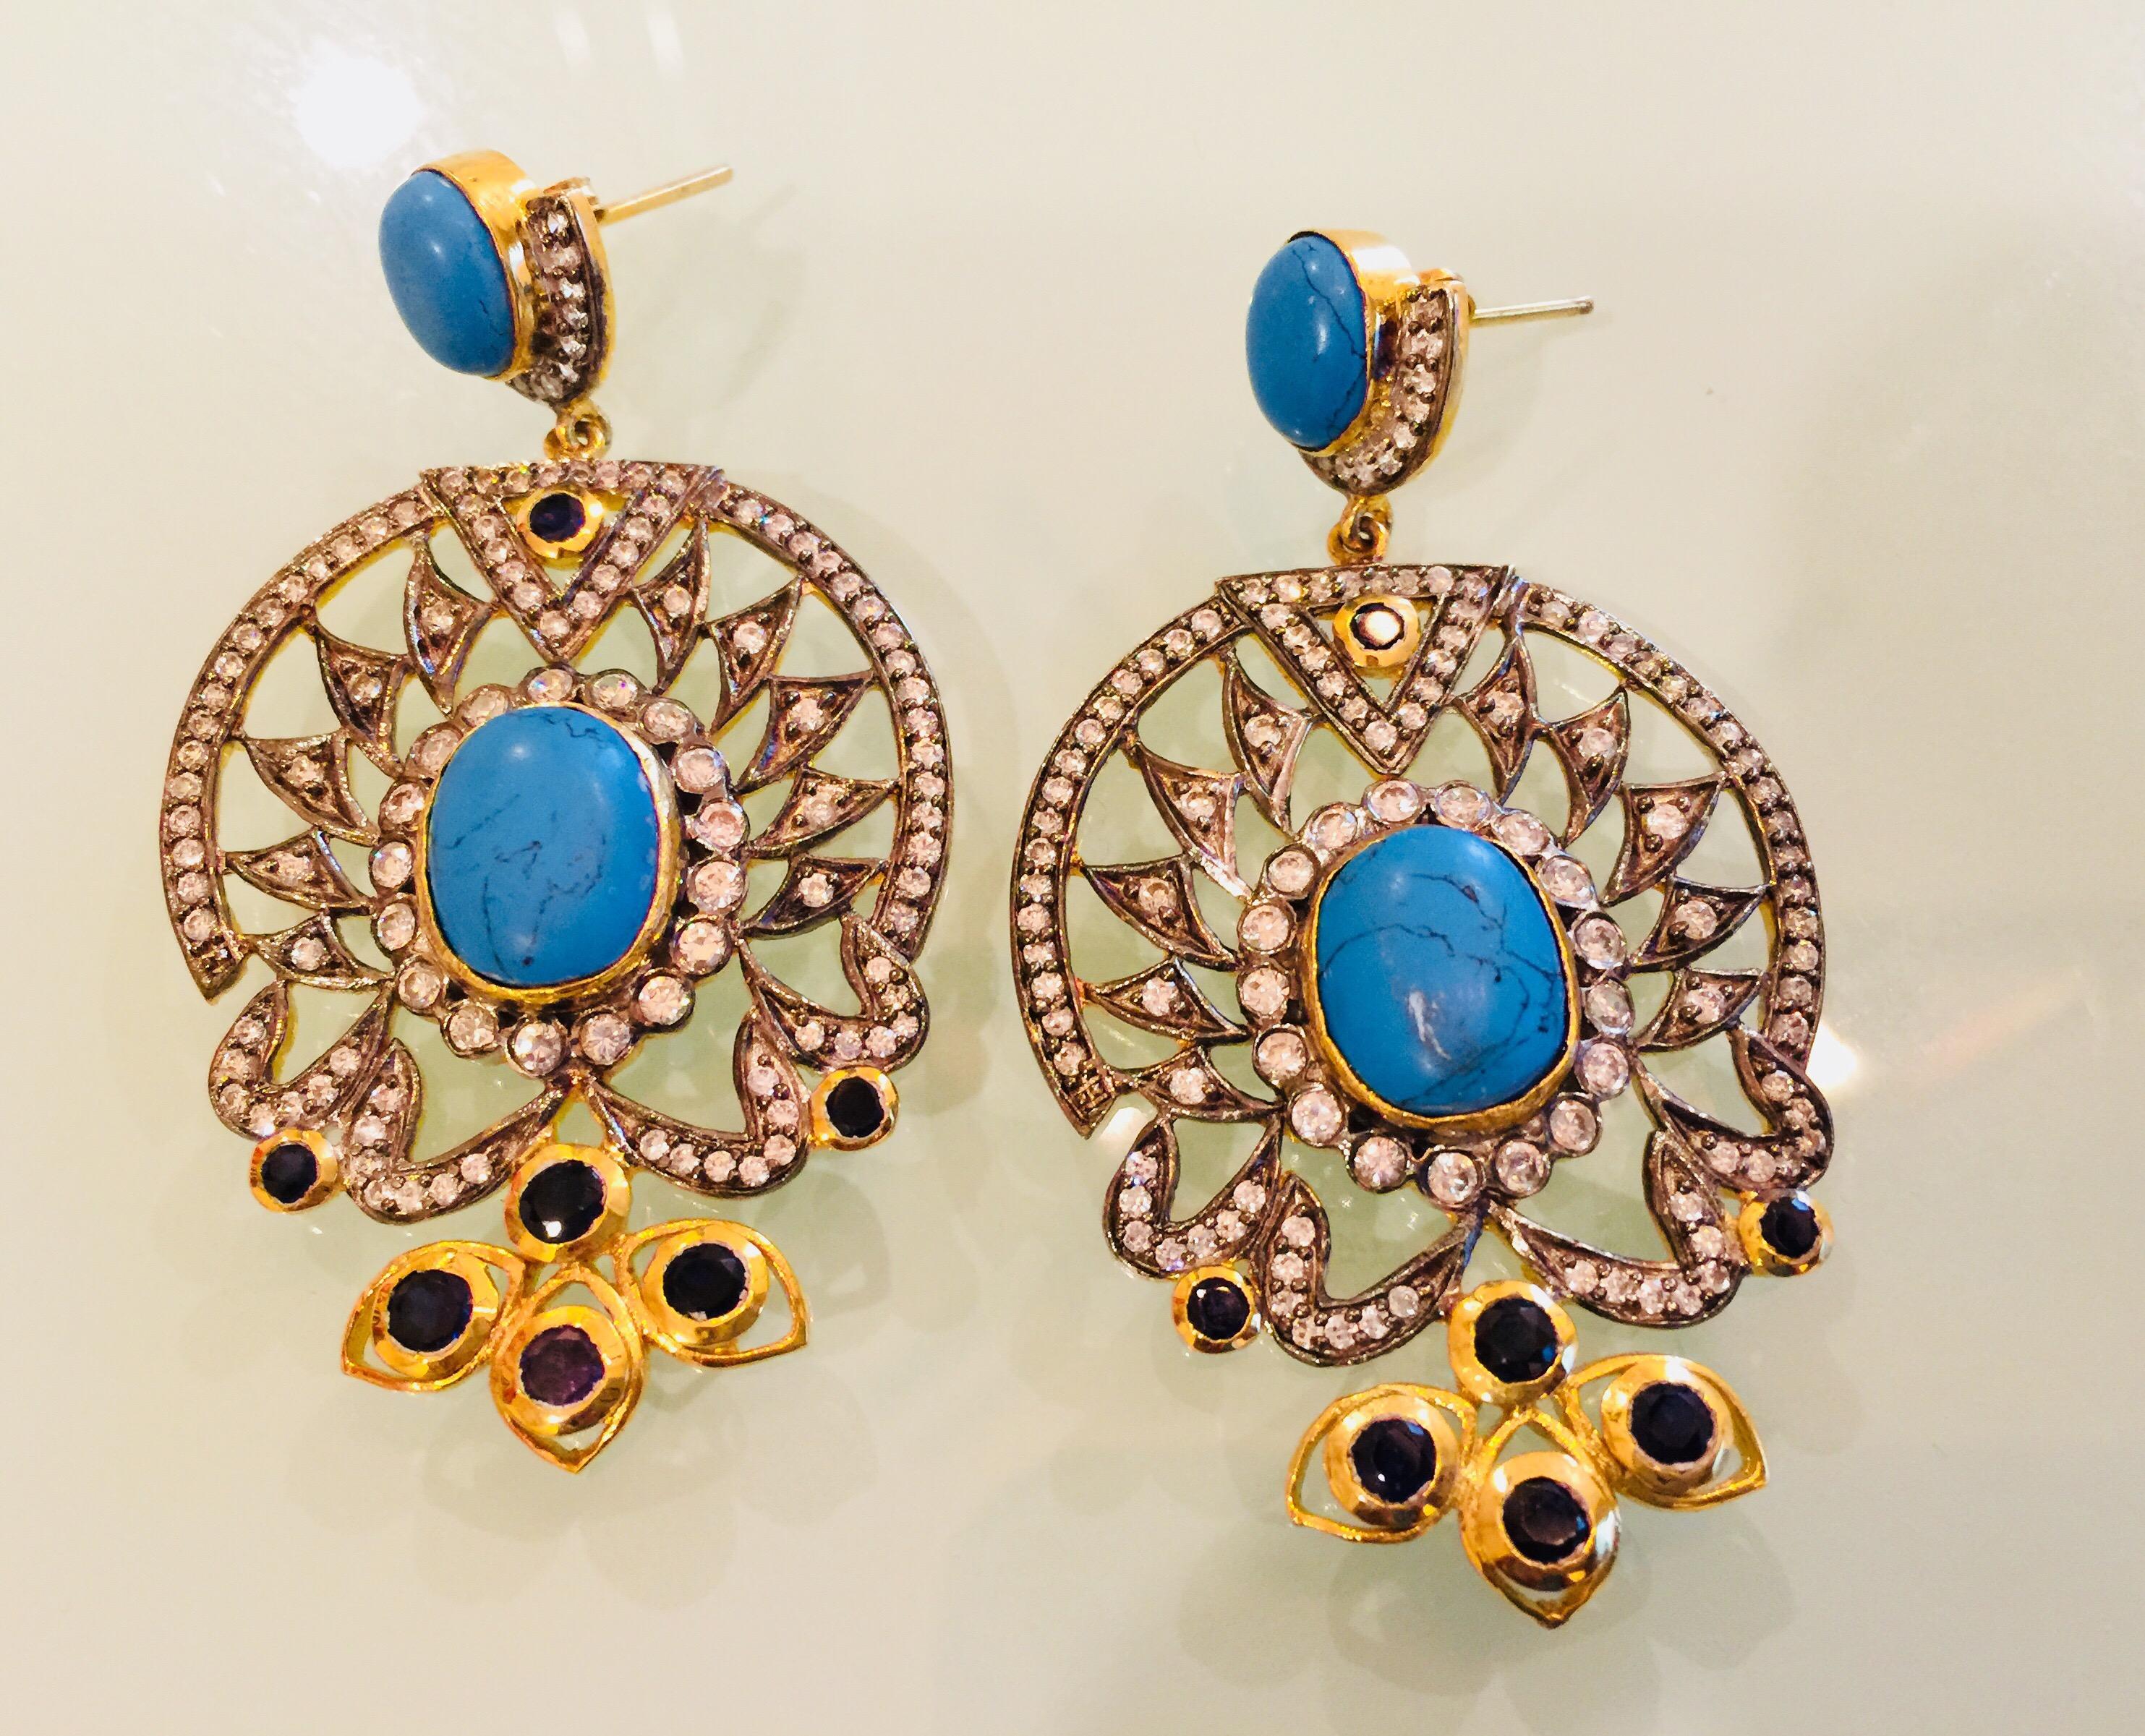 The design is ornate and lovely, the striking turquoise stone is enhanced by quartz stones and sparkling CZ stones. Earrings have a post closure for pierced ears.

A short video can be requested for this piece.
Stone: Turquoise, quartz, cubic